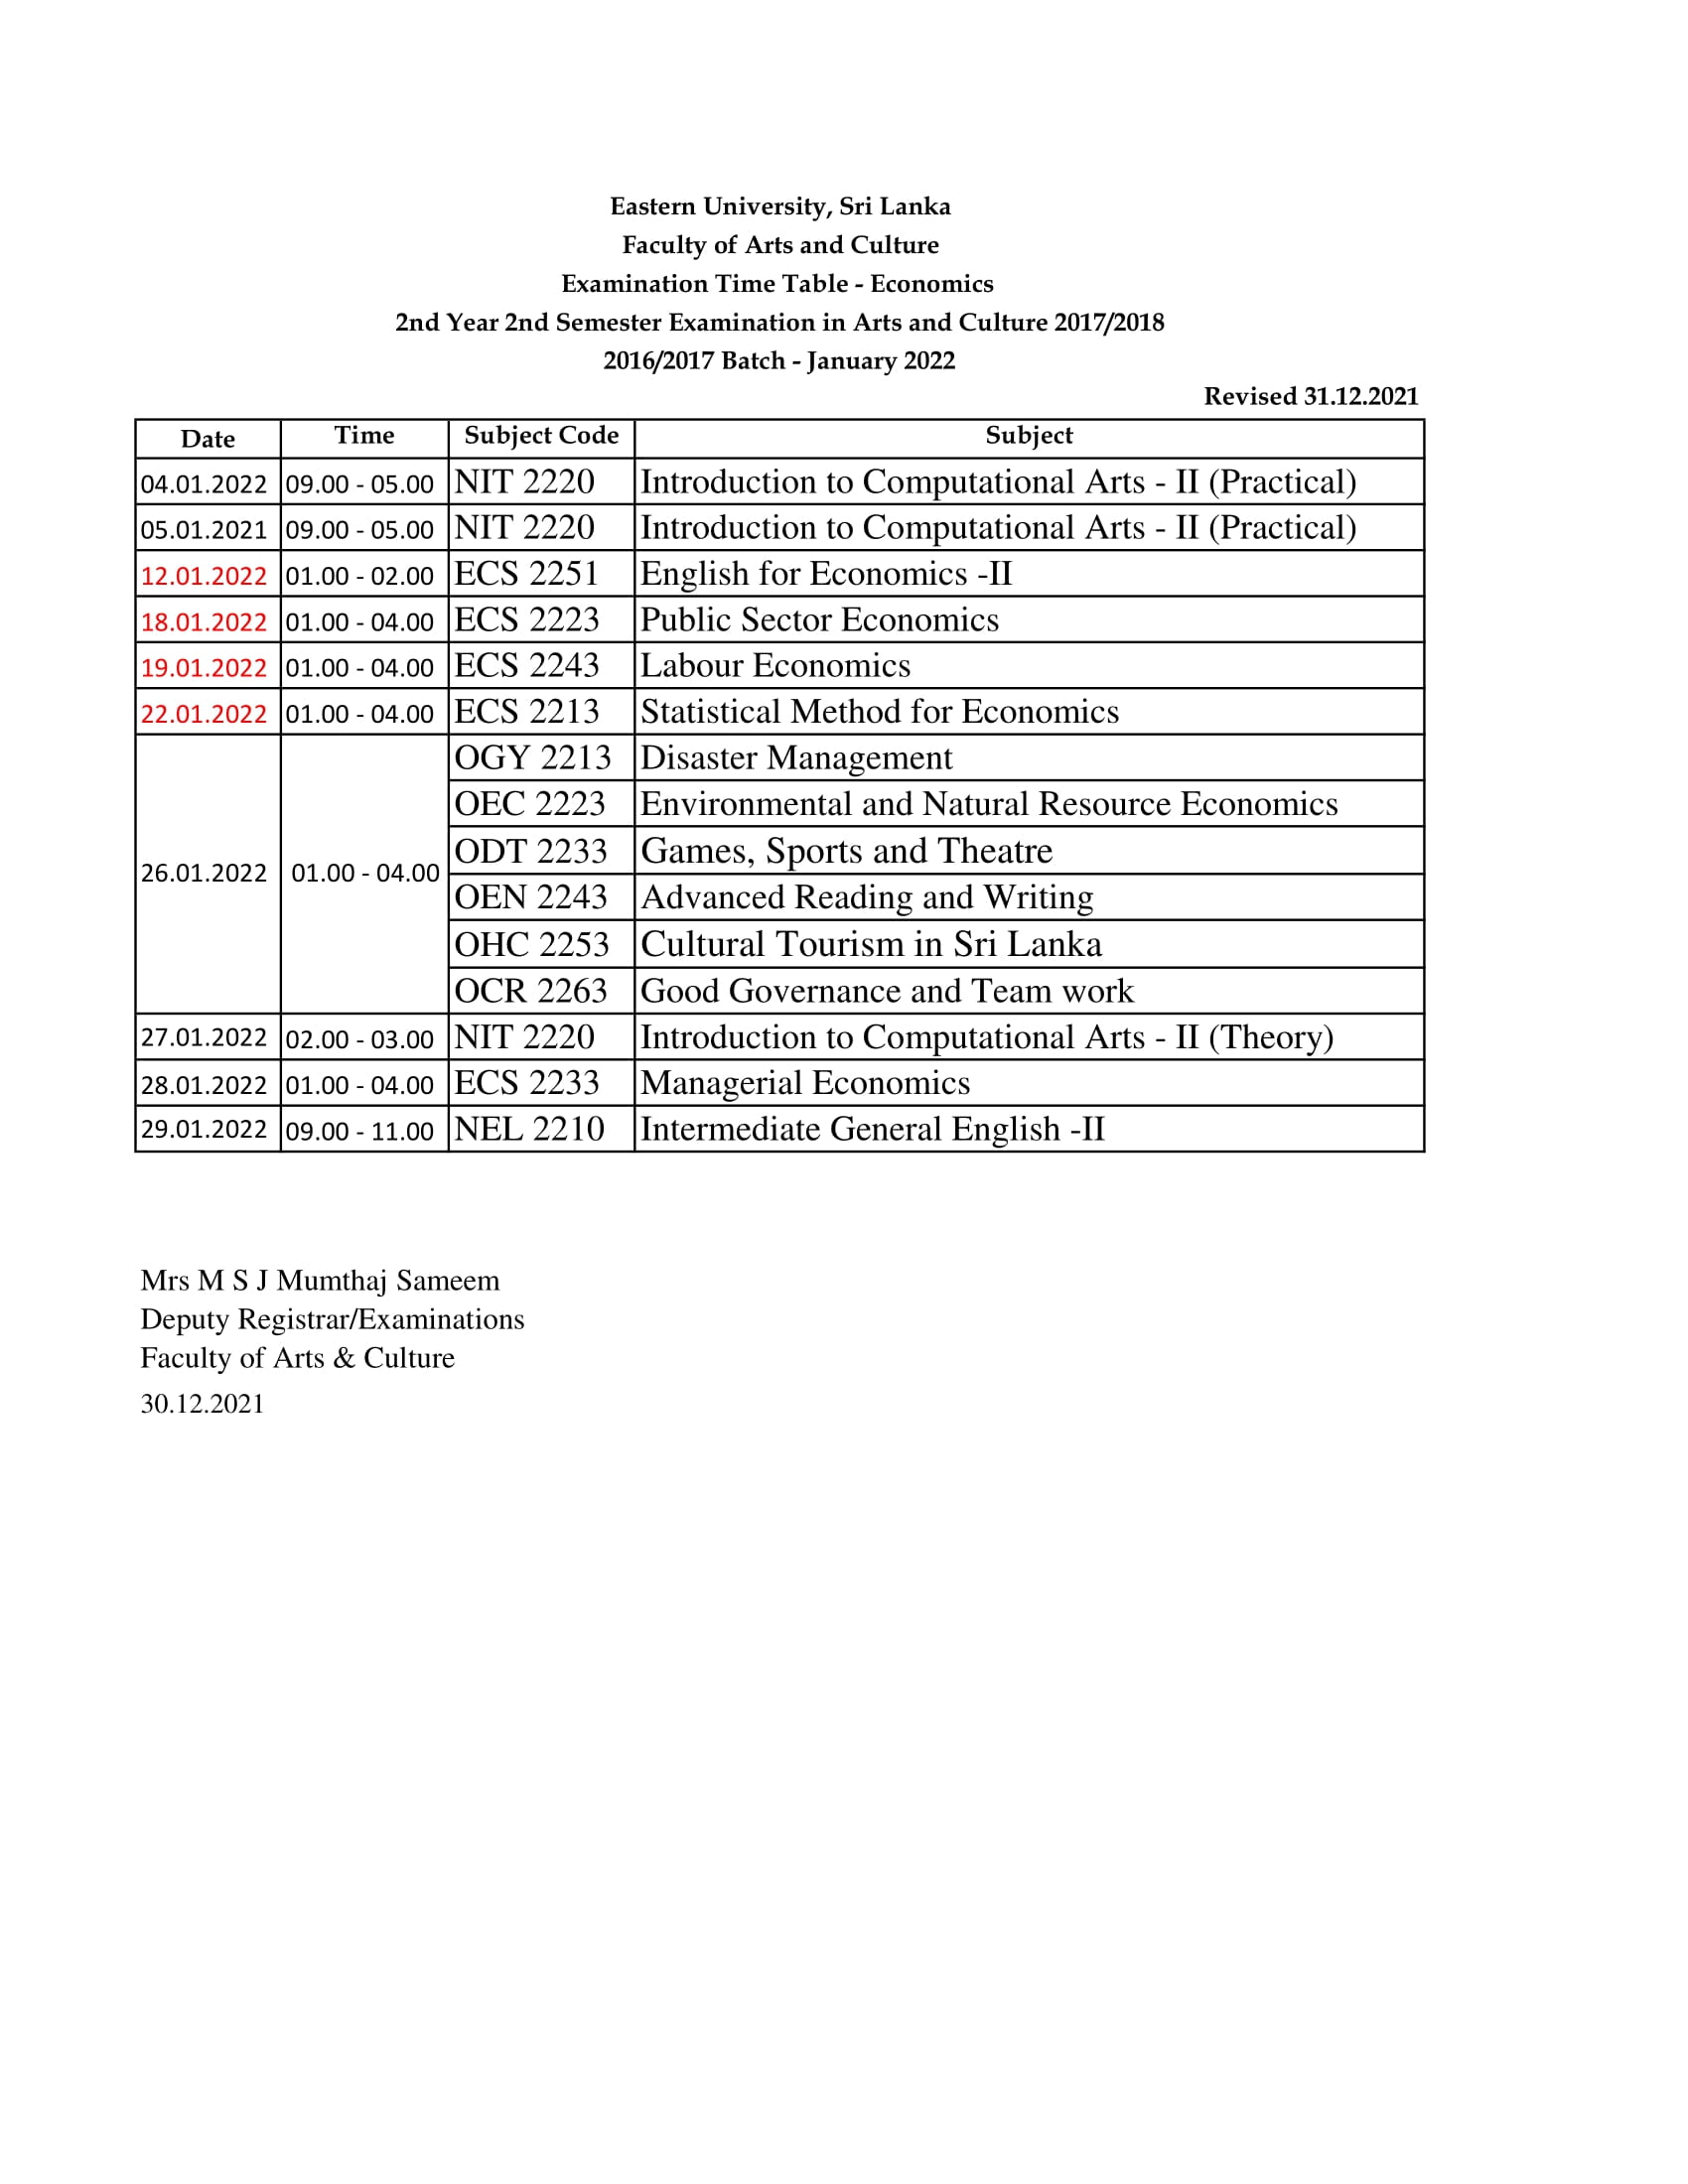 Updated exam time table 2nd year 2nd semester General, Philiosopy special and Economics Special -3.jpg